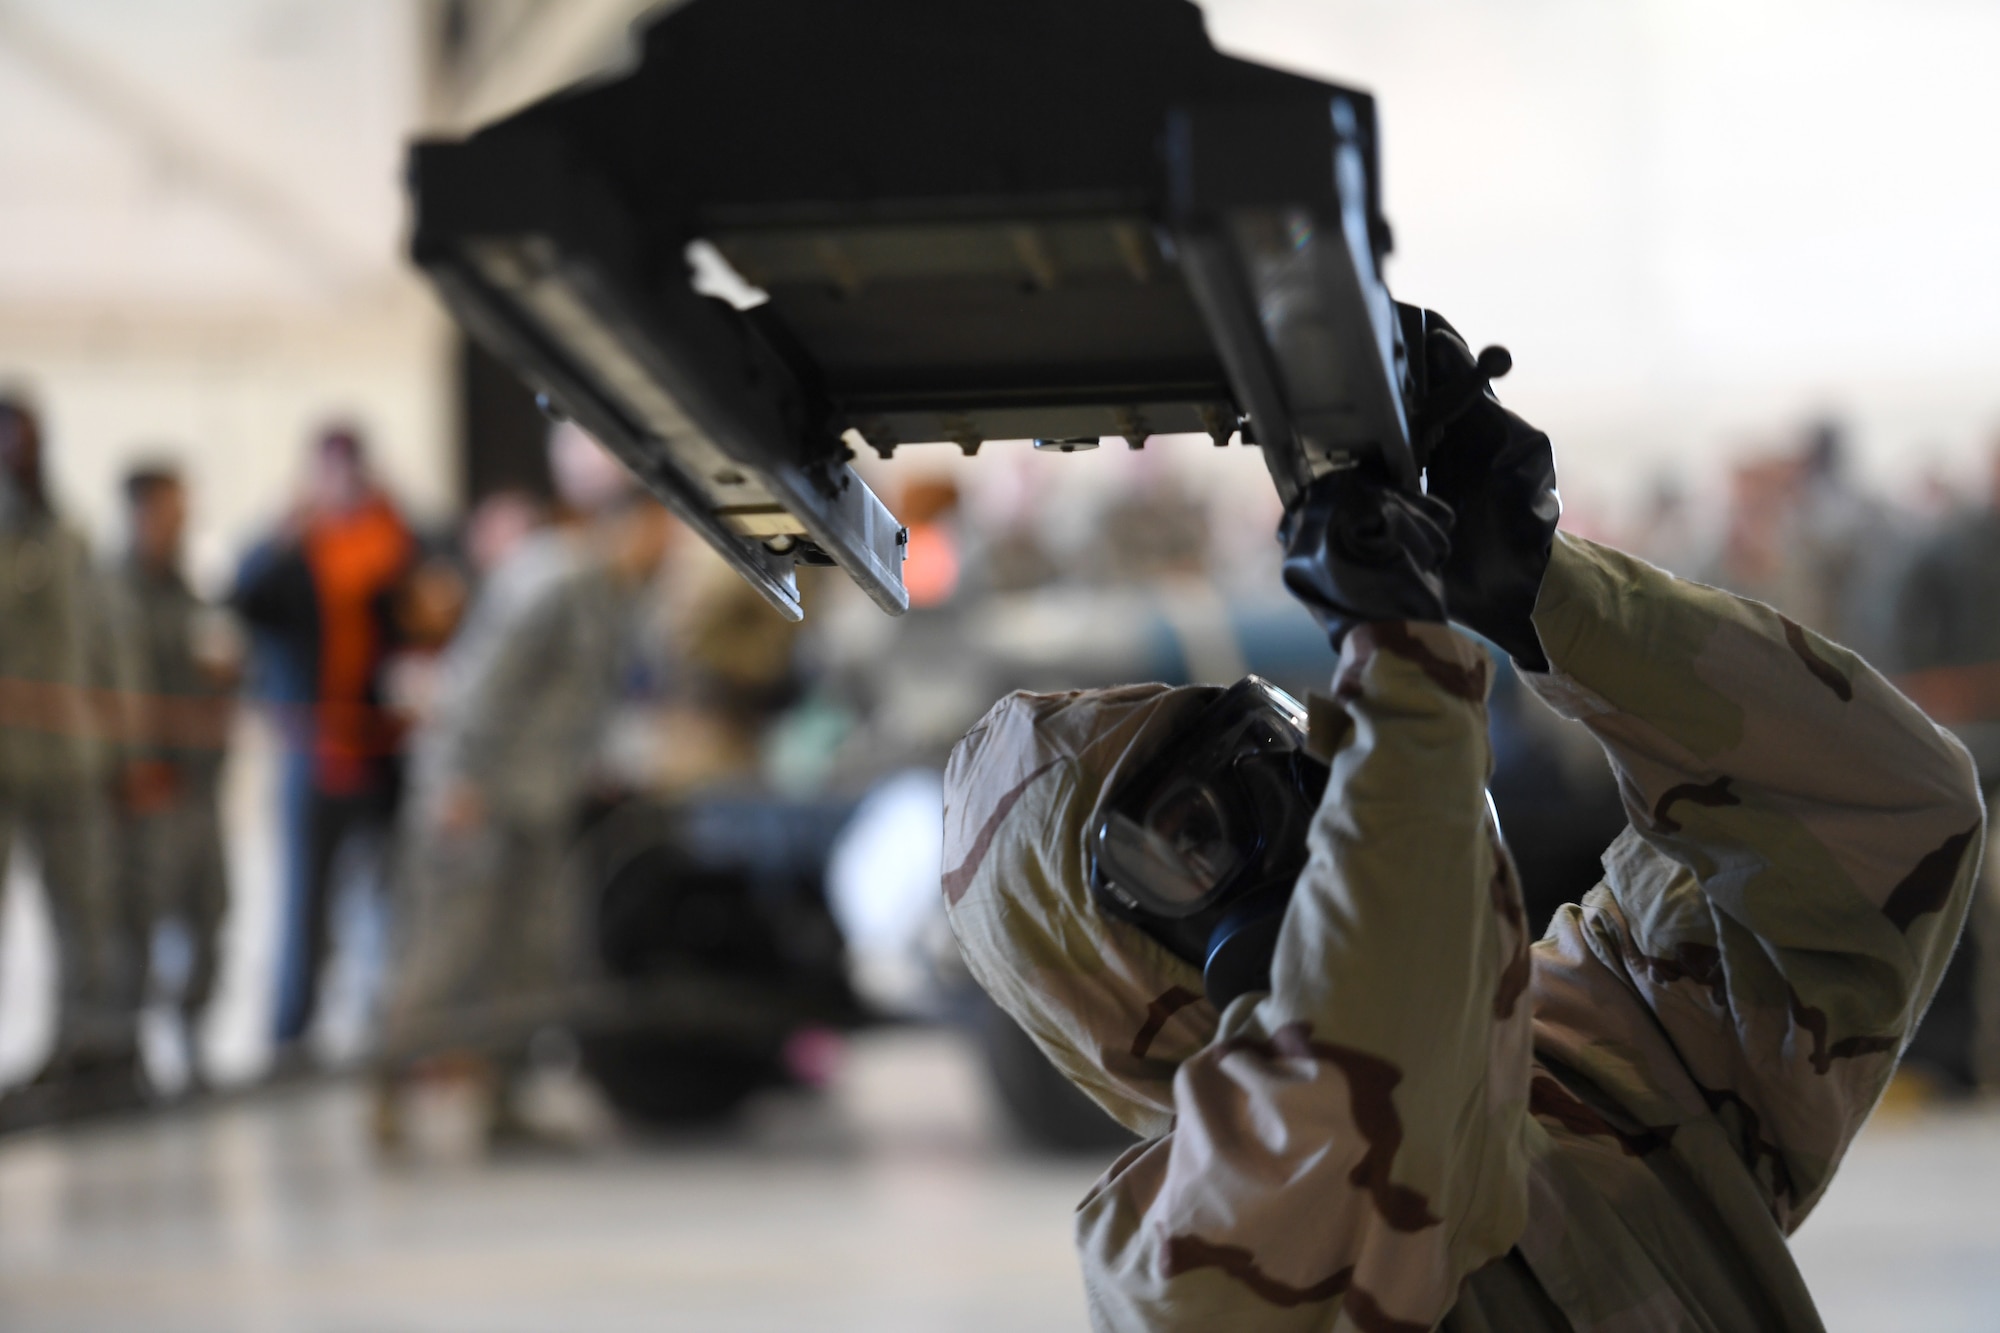 An Airman assigned to the 432nd Aircraft Maintenance Squadron Tiger Aircraft Maintenance Unit prepares to load a GBU-38 Joint Direct Attack Munition during a weapons load competition Dec. 8, 2017, at Creech Air Force Base, Nev. This was the first weapons load that required participants to wear full chemical, biological, radiological, nuclear and explosives gear in more than three years. (U.S. Air Force photo by Senior Airman James Thompson)